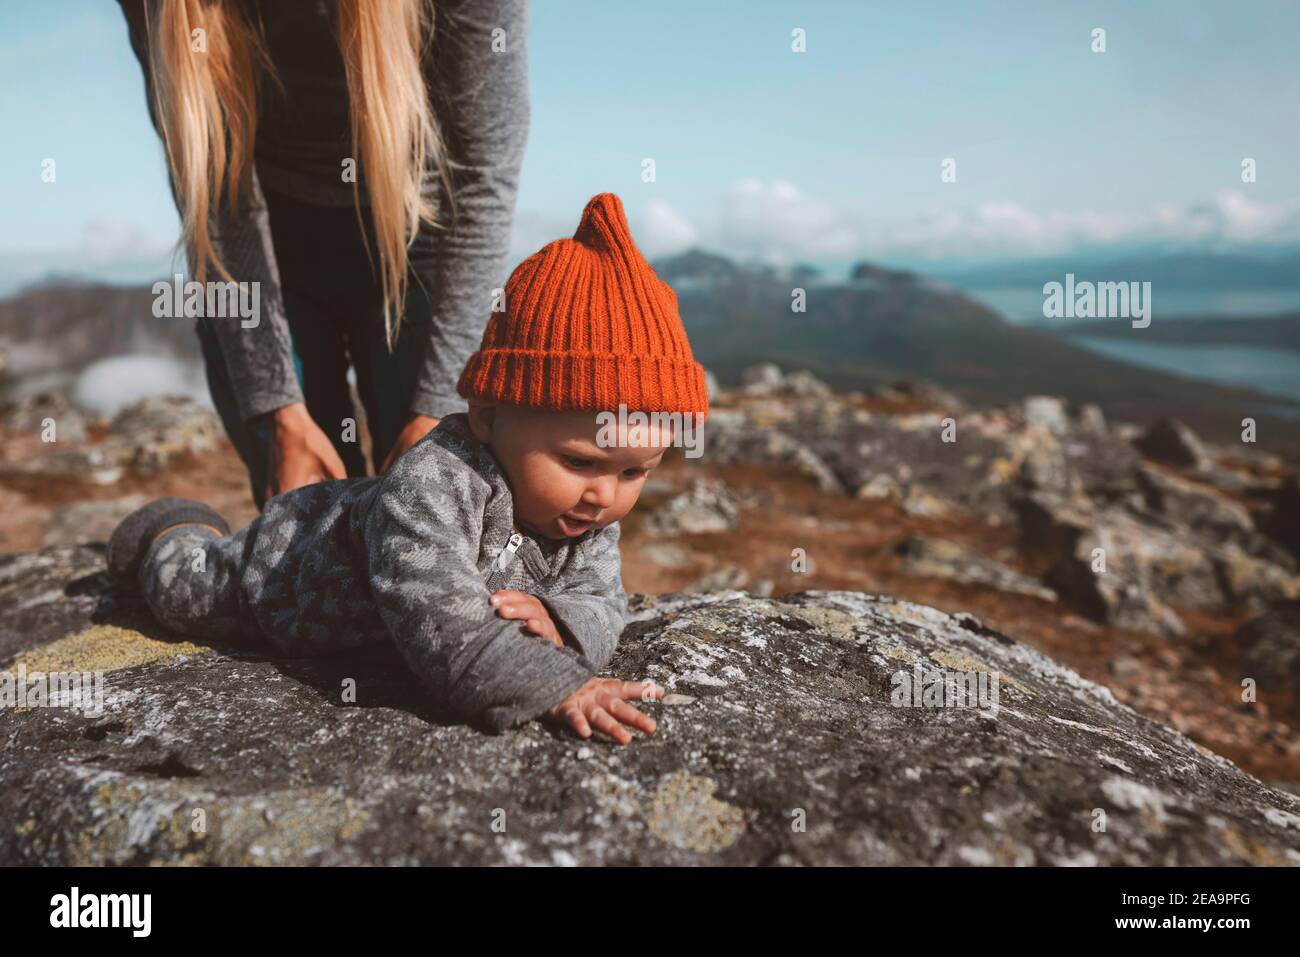 Baby learning crawling outdoor family vacation mother with child infant  wearing orange hat autumn season in Norway Stock Photo